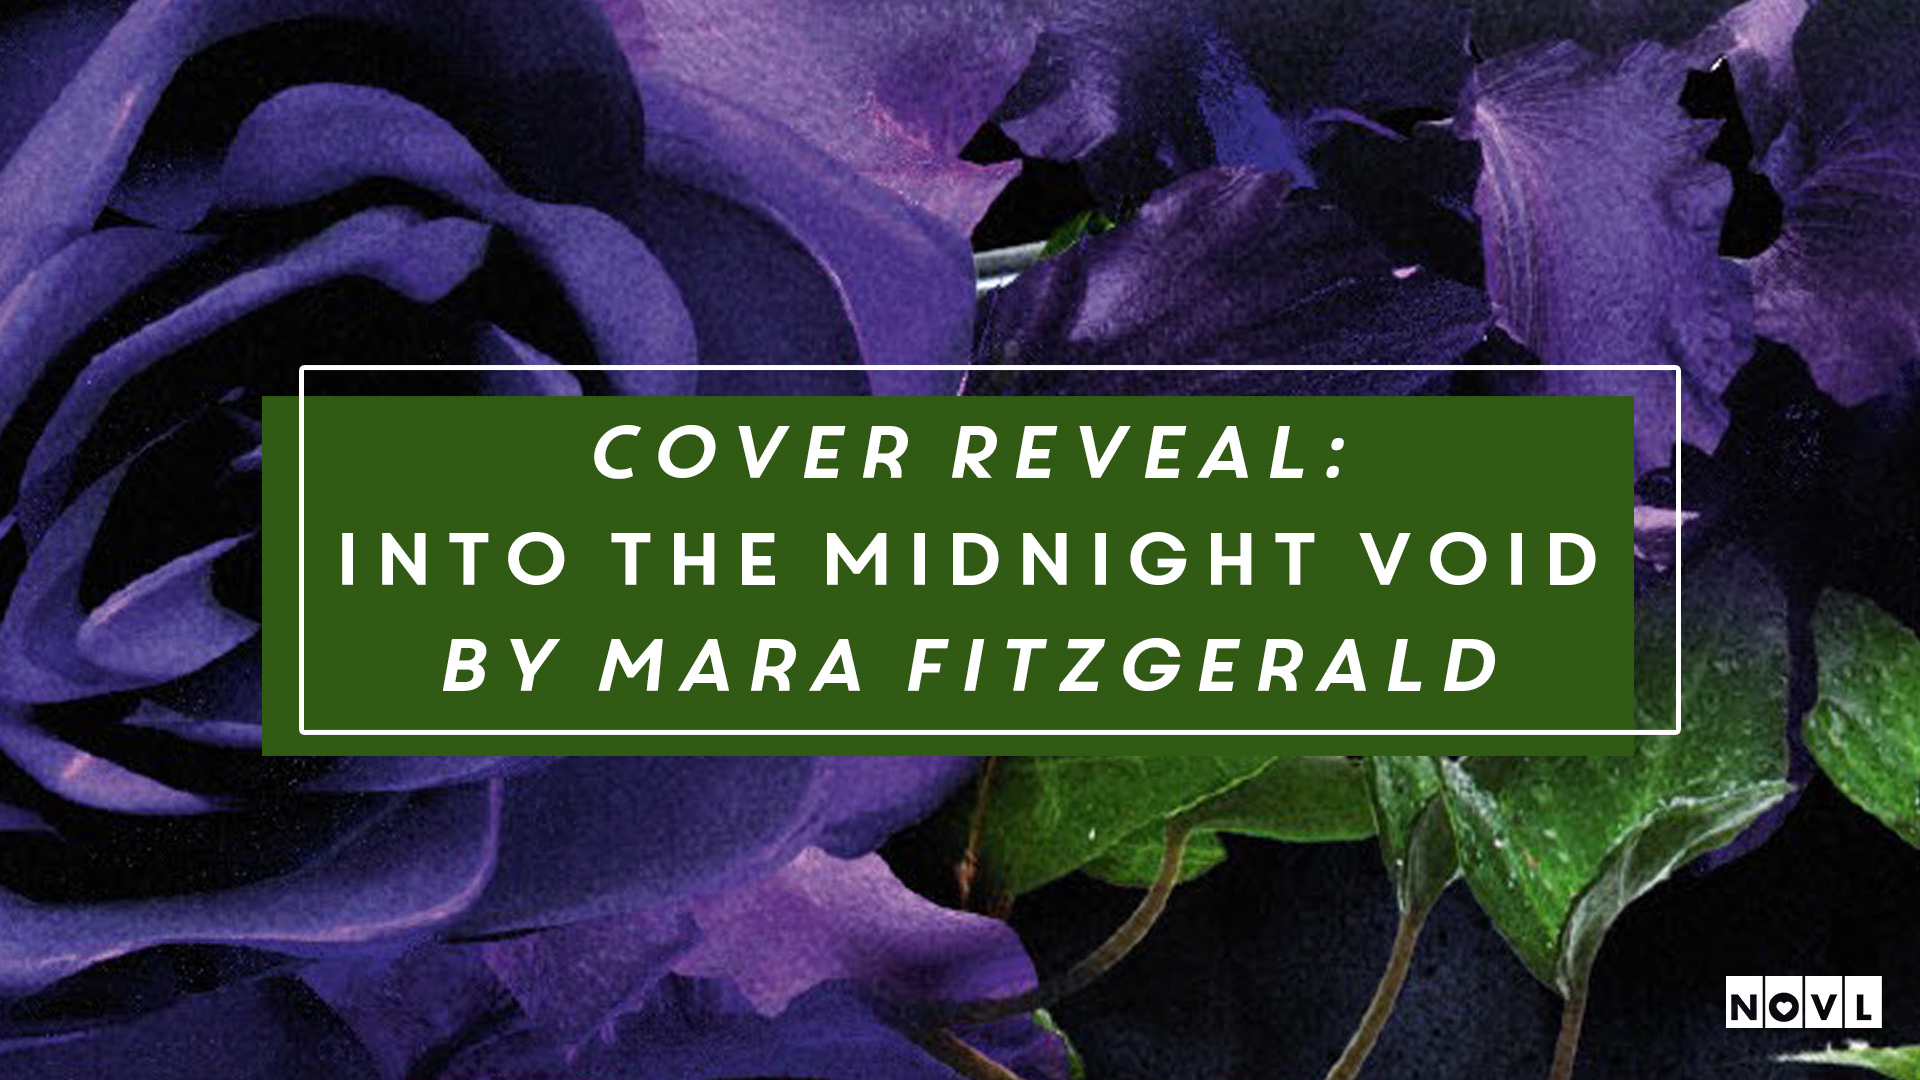 The NOVL Blog, Featured Image for Article: Cover Reveal: Into the Midnight Void by Mara Fitzgerald